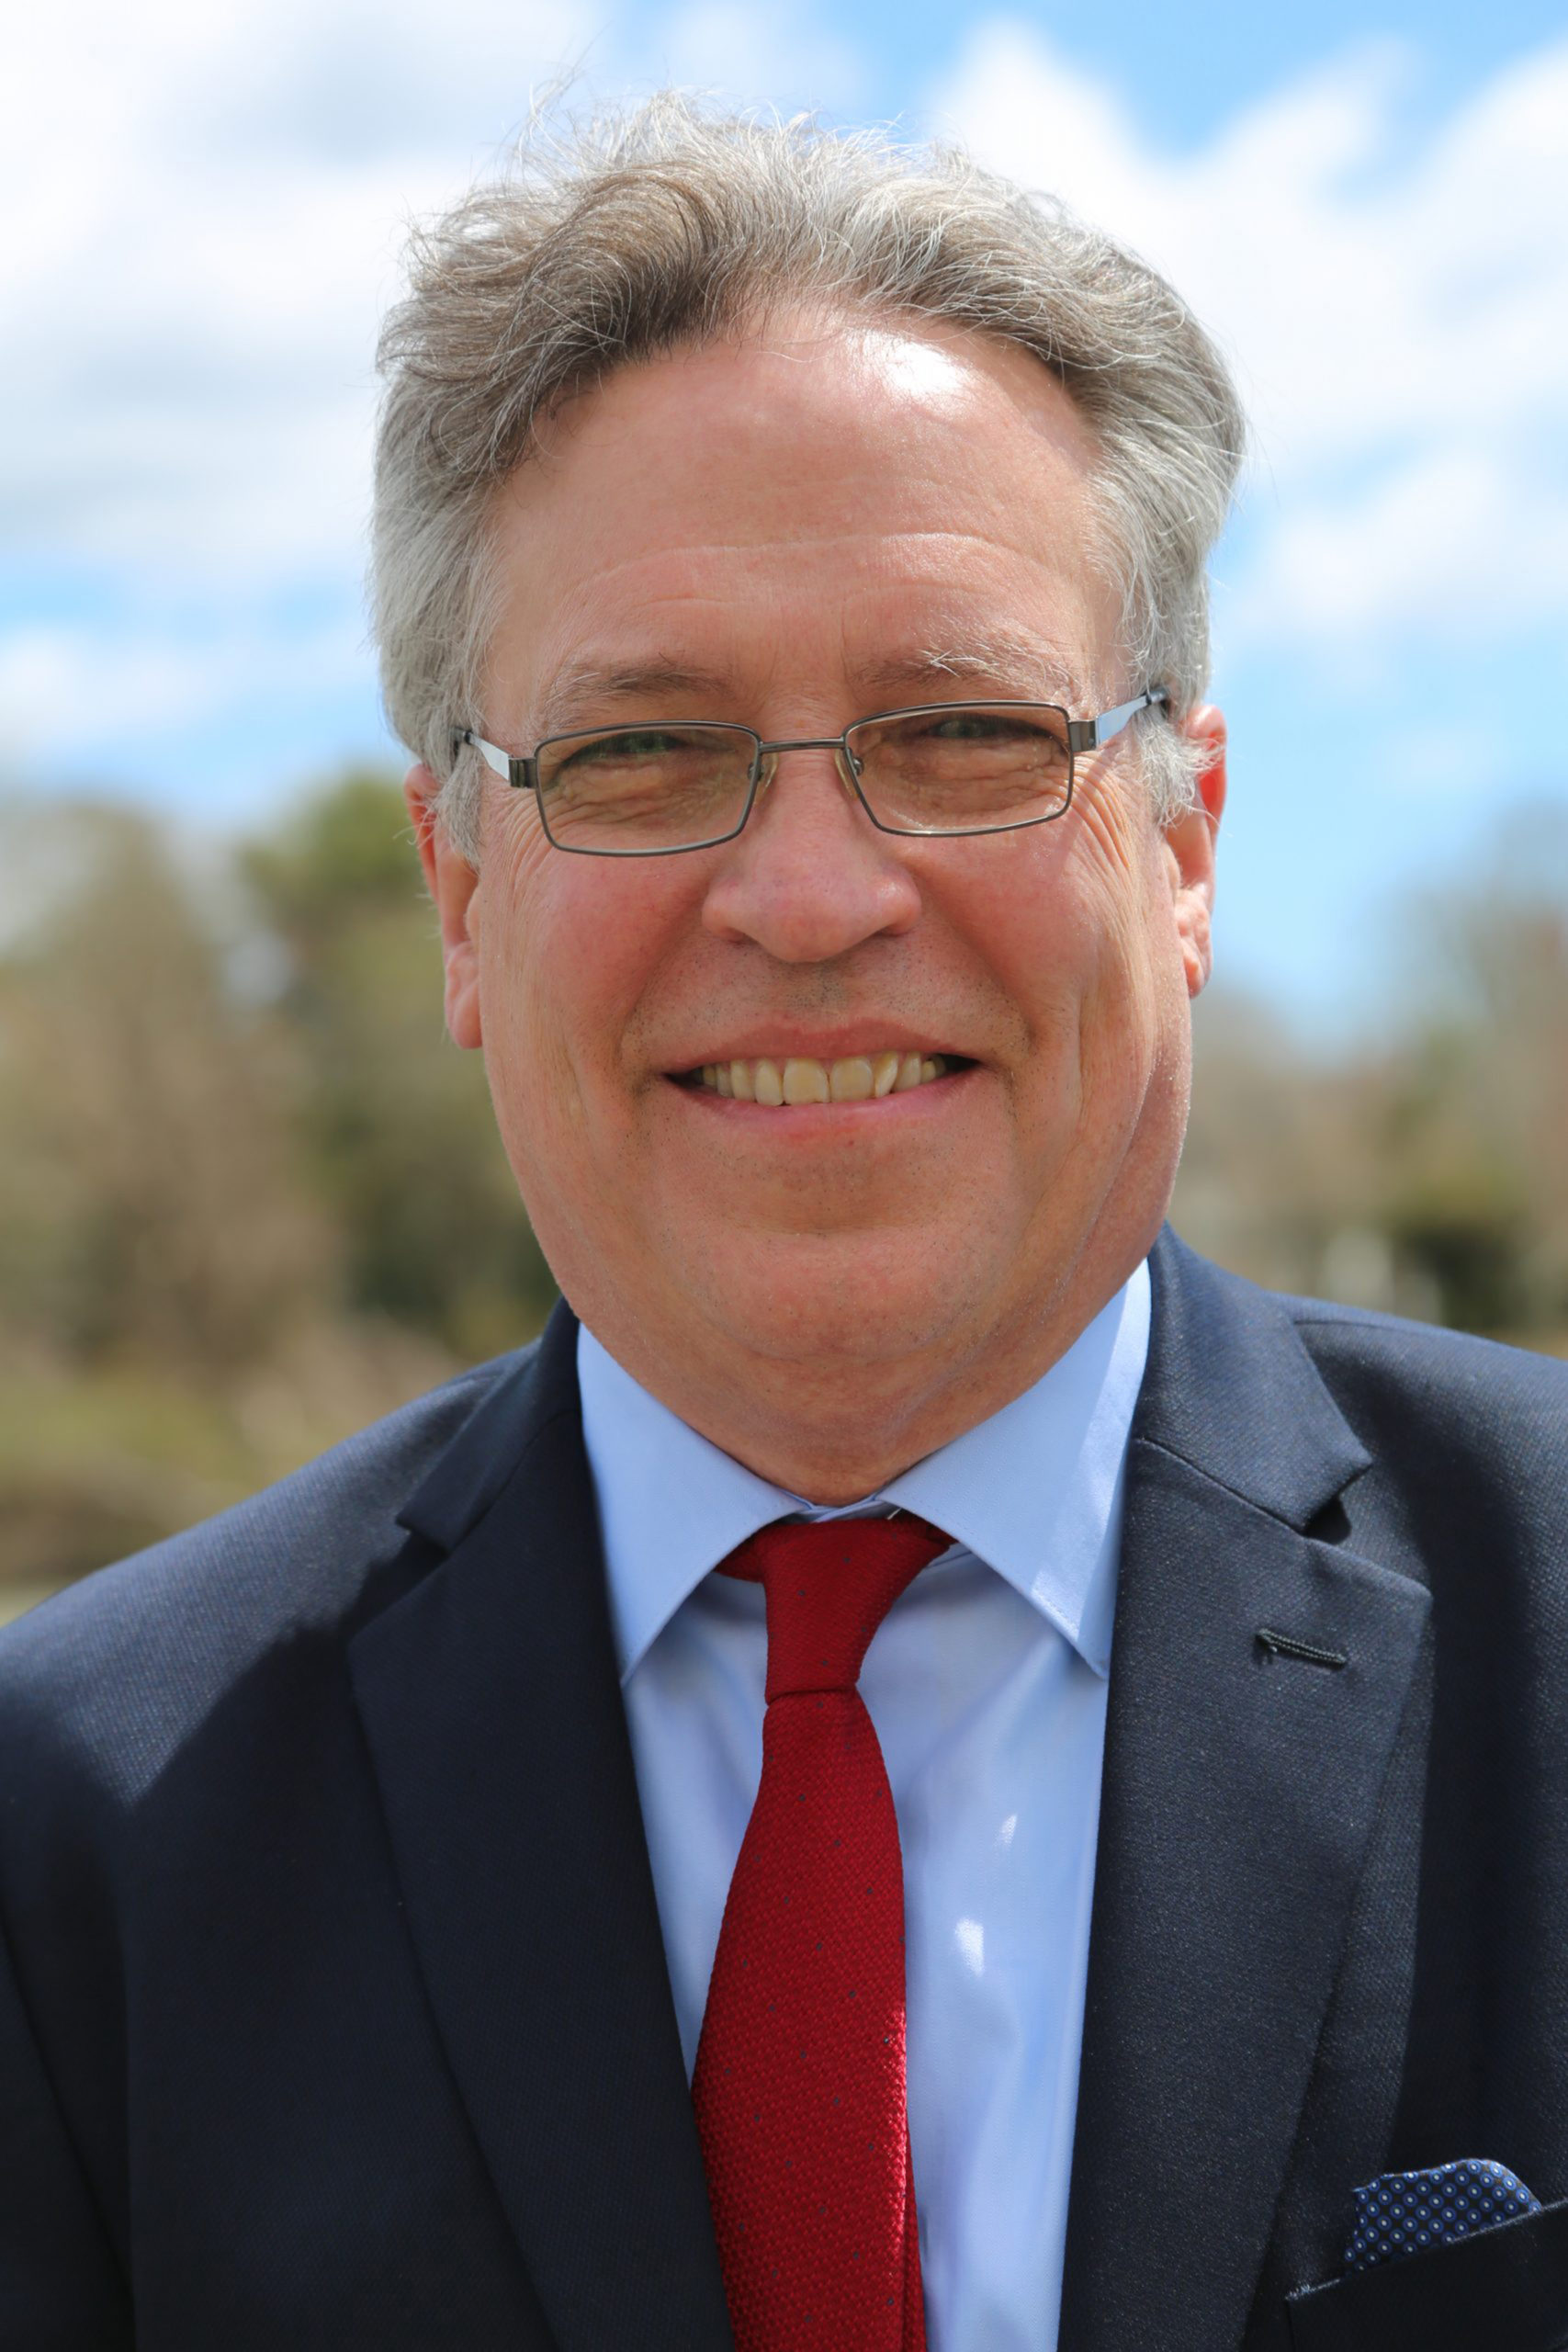 Tom Neely was appointed to the Southampton Town Planning Board.